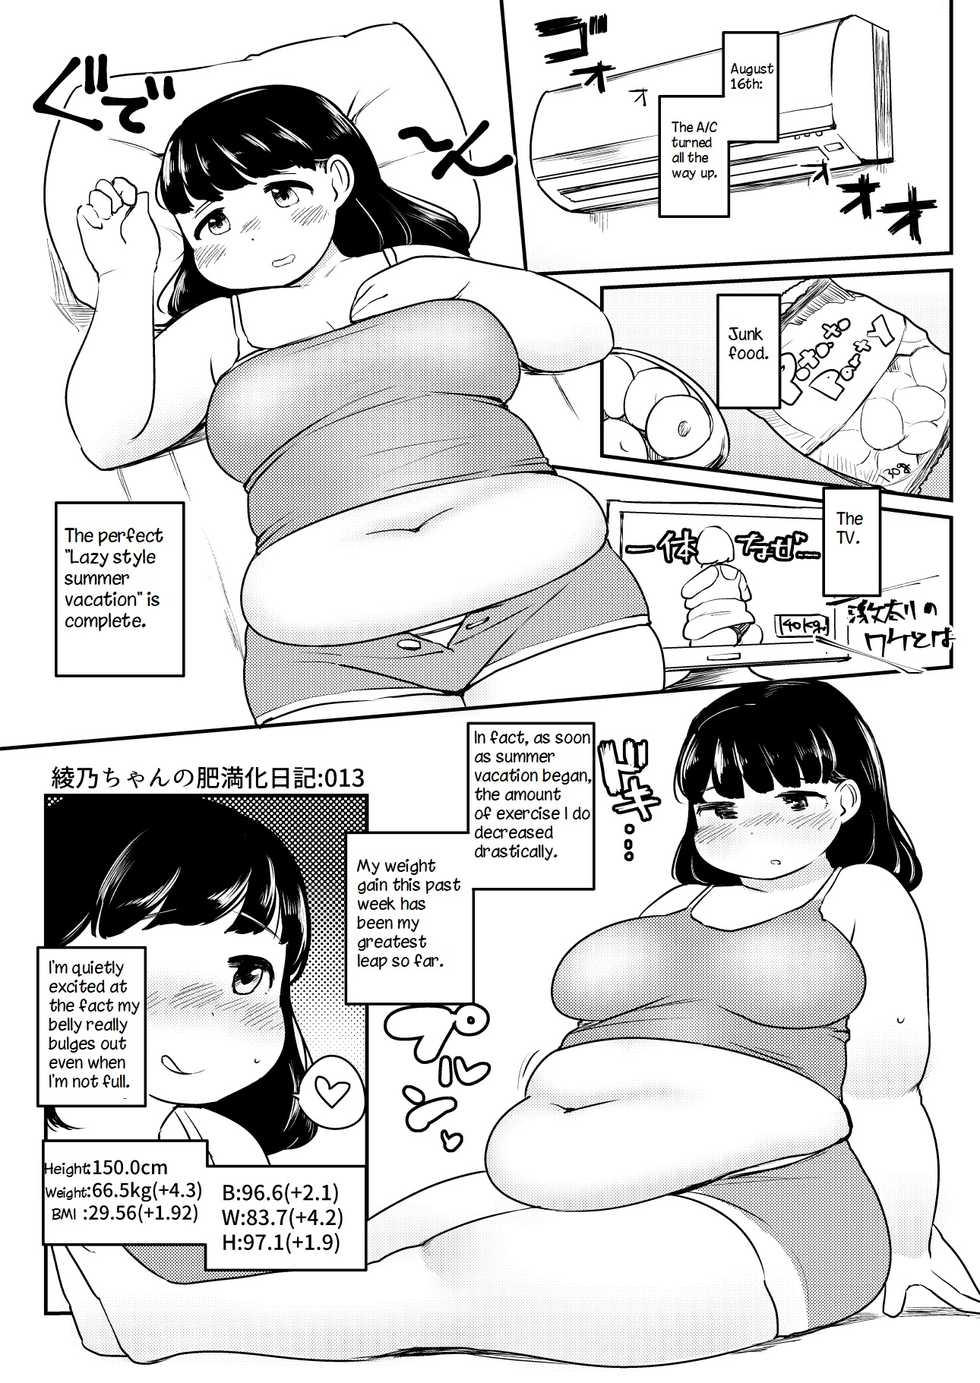 Ayano's Weight Gain Diary [English] - Page 13